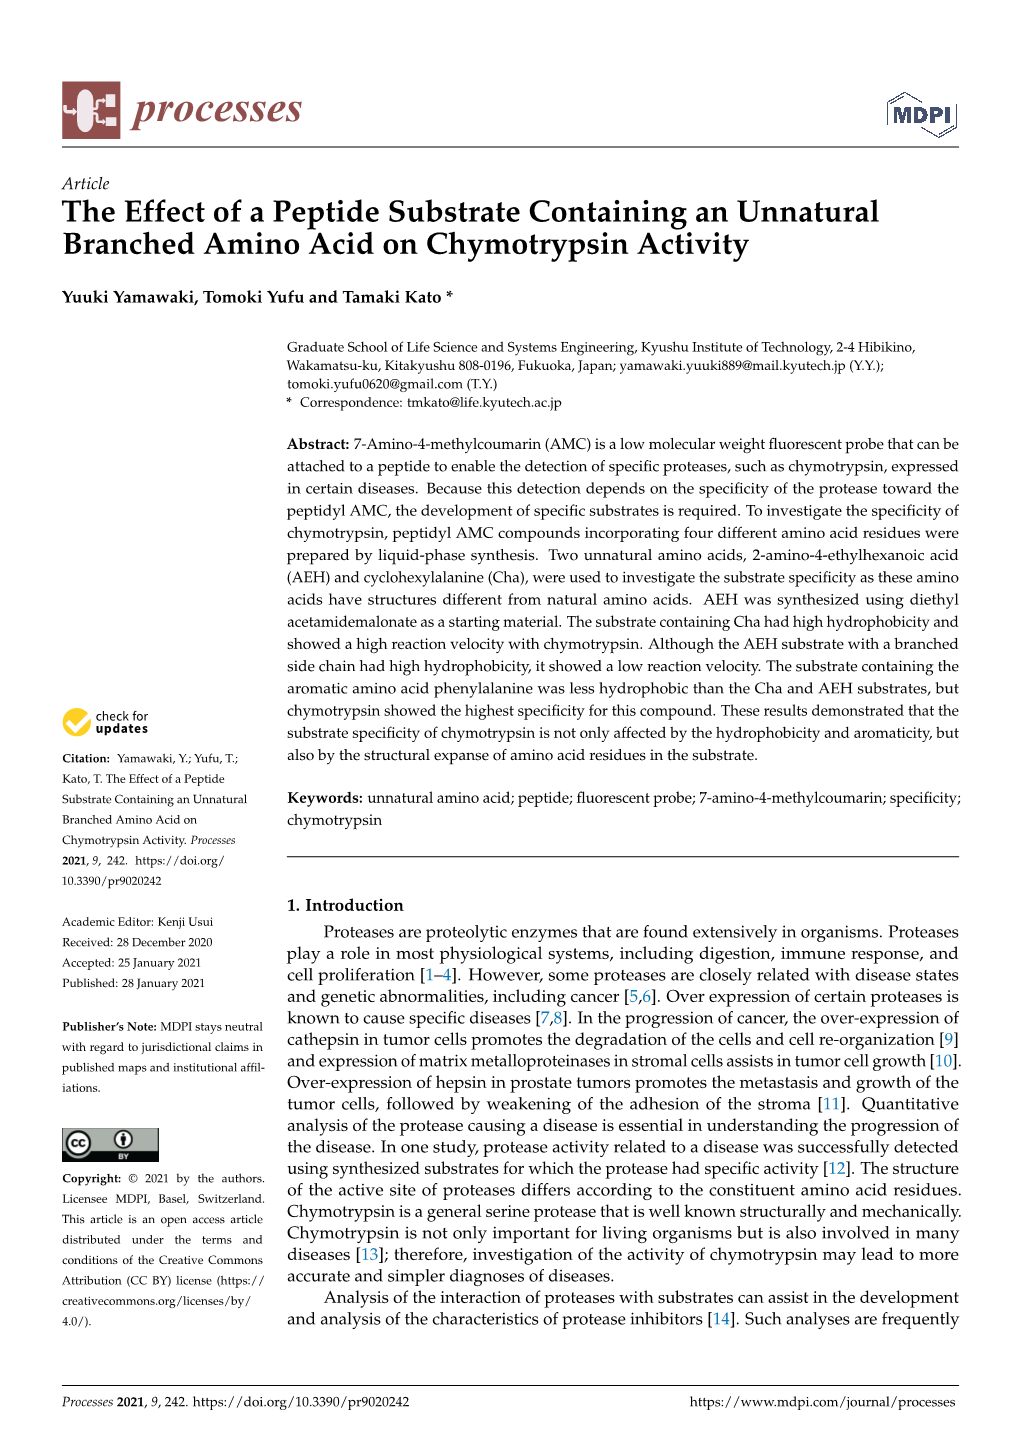 The Effect of a Peptide Substrate Containing an Unnatural Branched Amino Acid on Chymotrypsin Activity